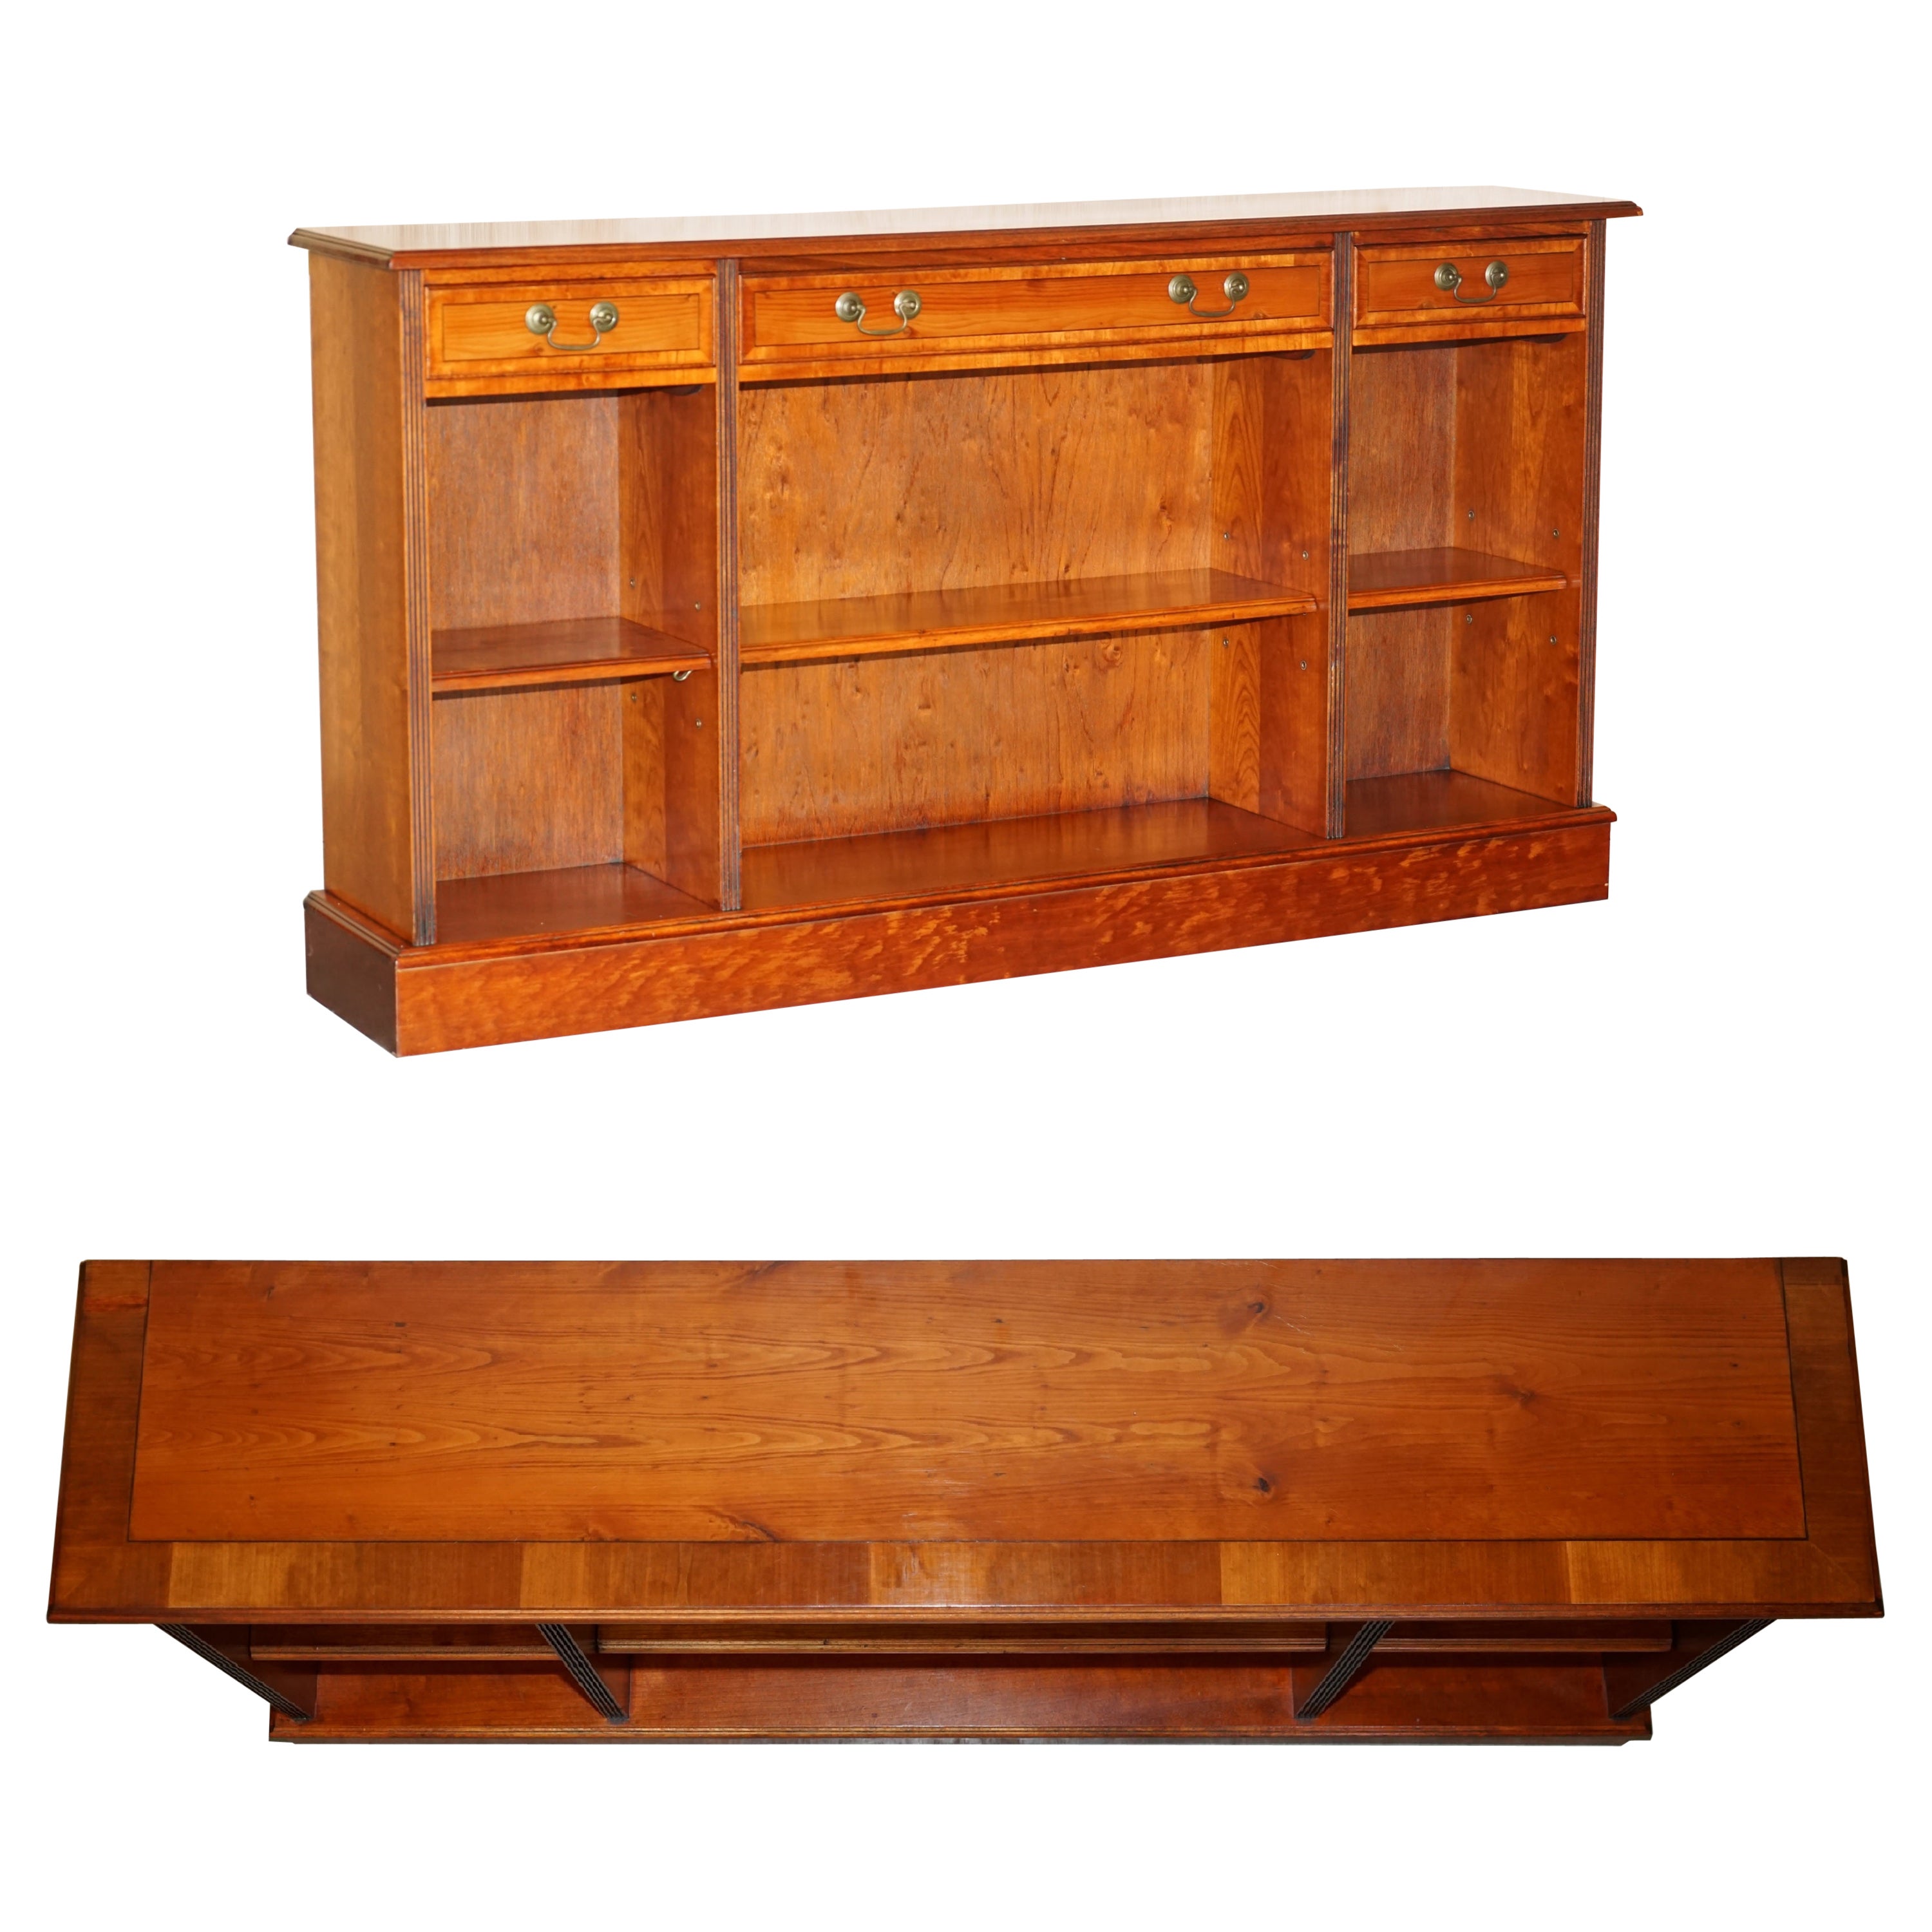 Vintage Burr Yew Wood Dwarf Open Bookcase or Sideboardthree Large Drawers